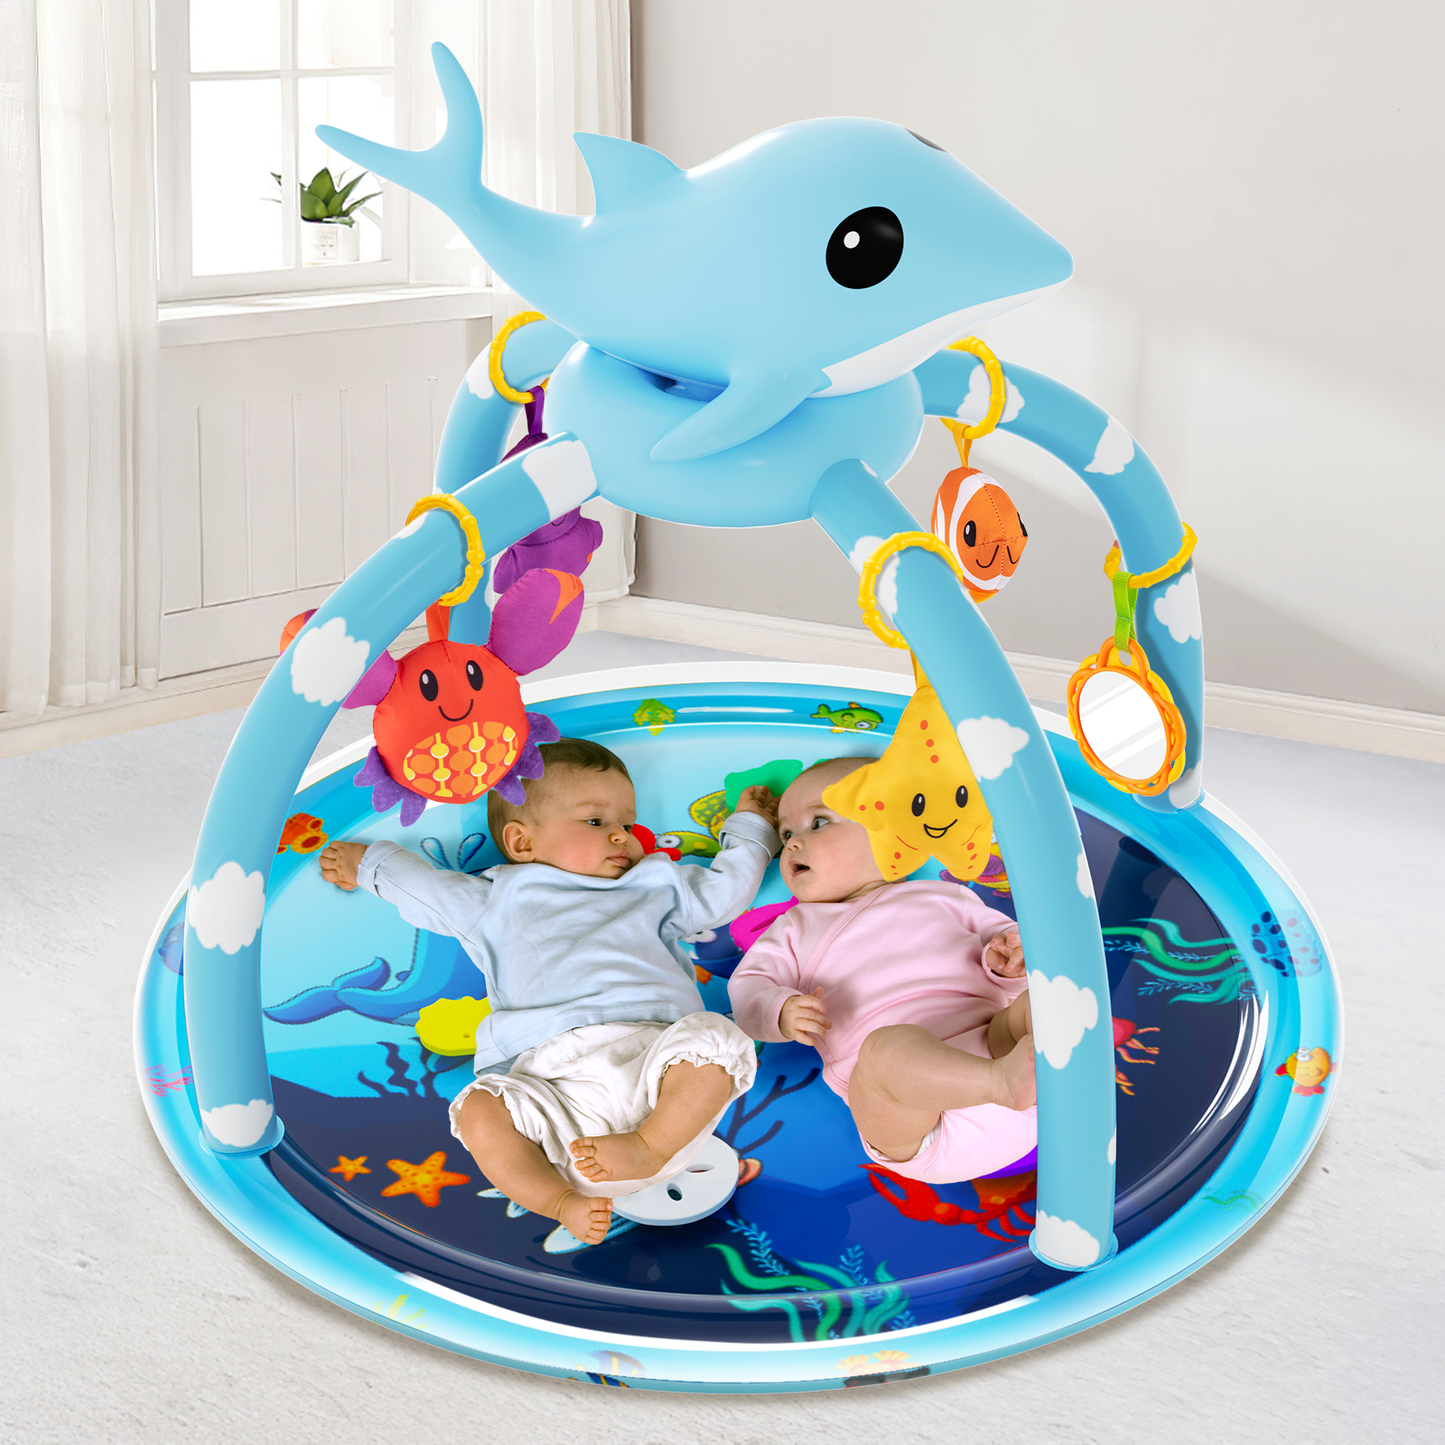 UNIH 2-in-1 Baby Gym Play Mats, Inflatable Tummy Time Water Mat Activity Center